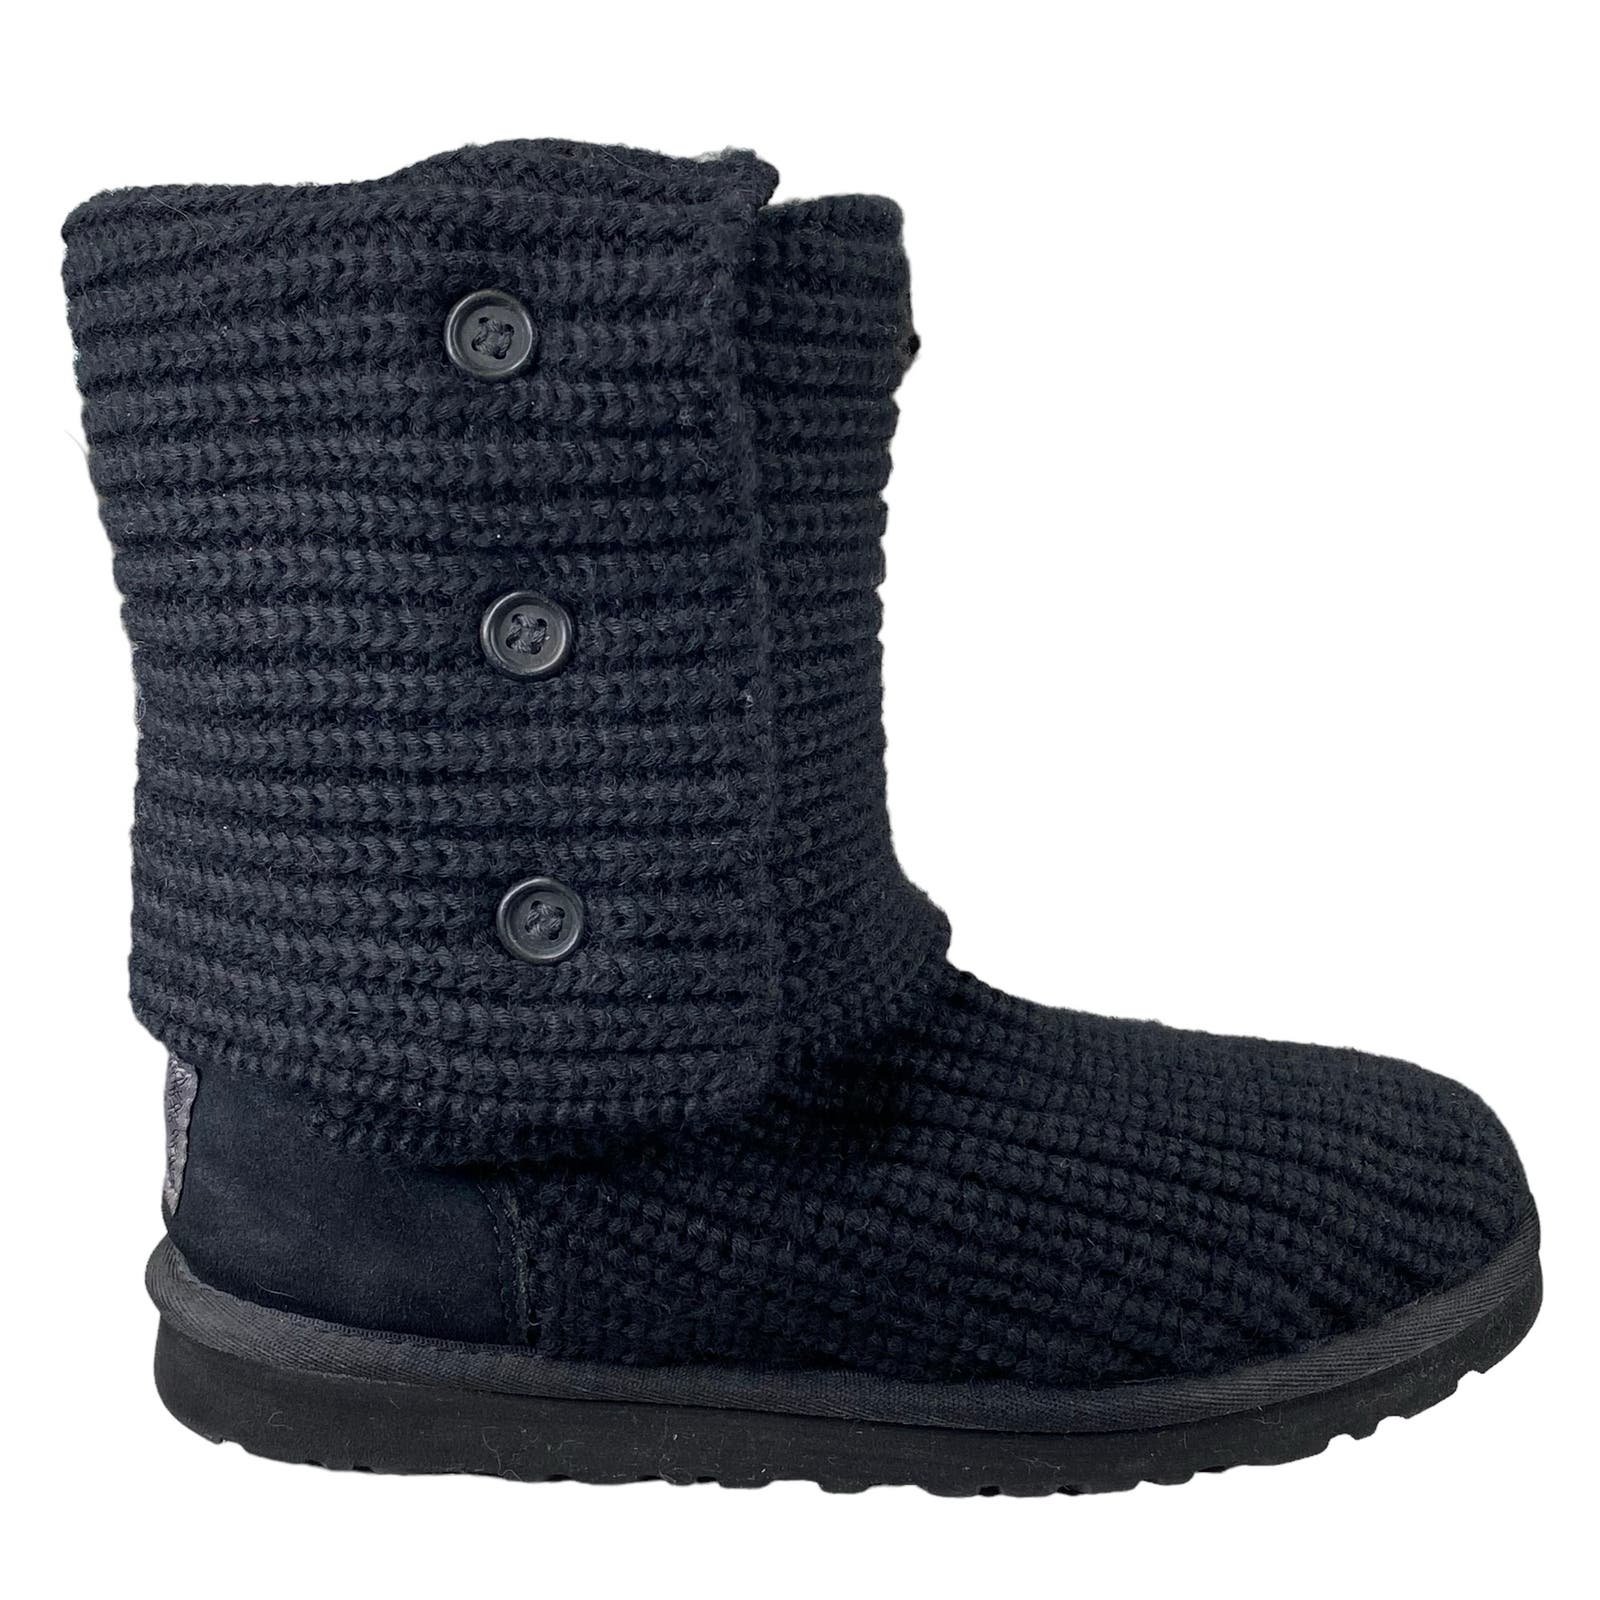 UGG Women’s Black Cardy Pull On Winter Boot Size US 6 BszikDs0N